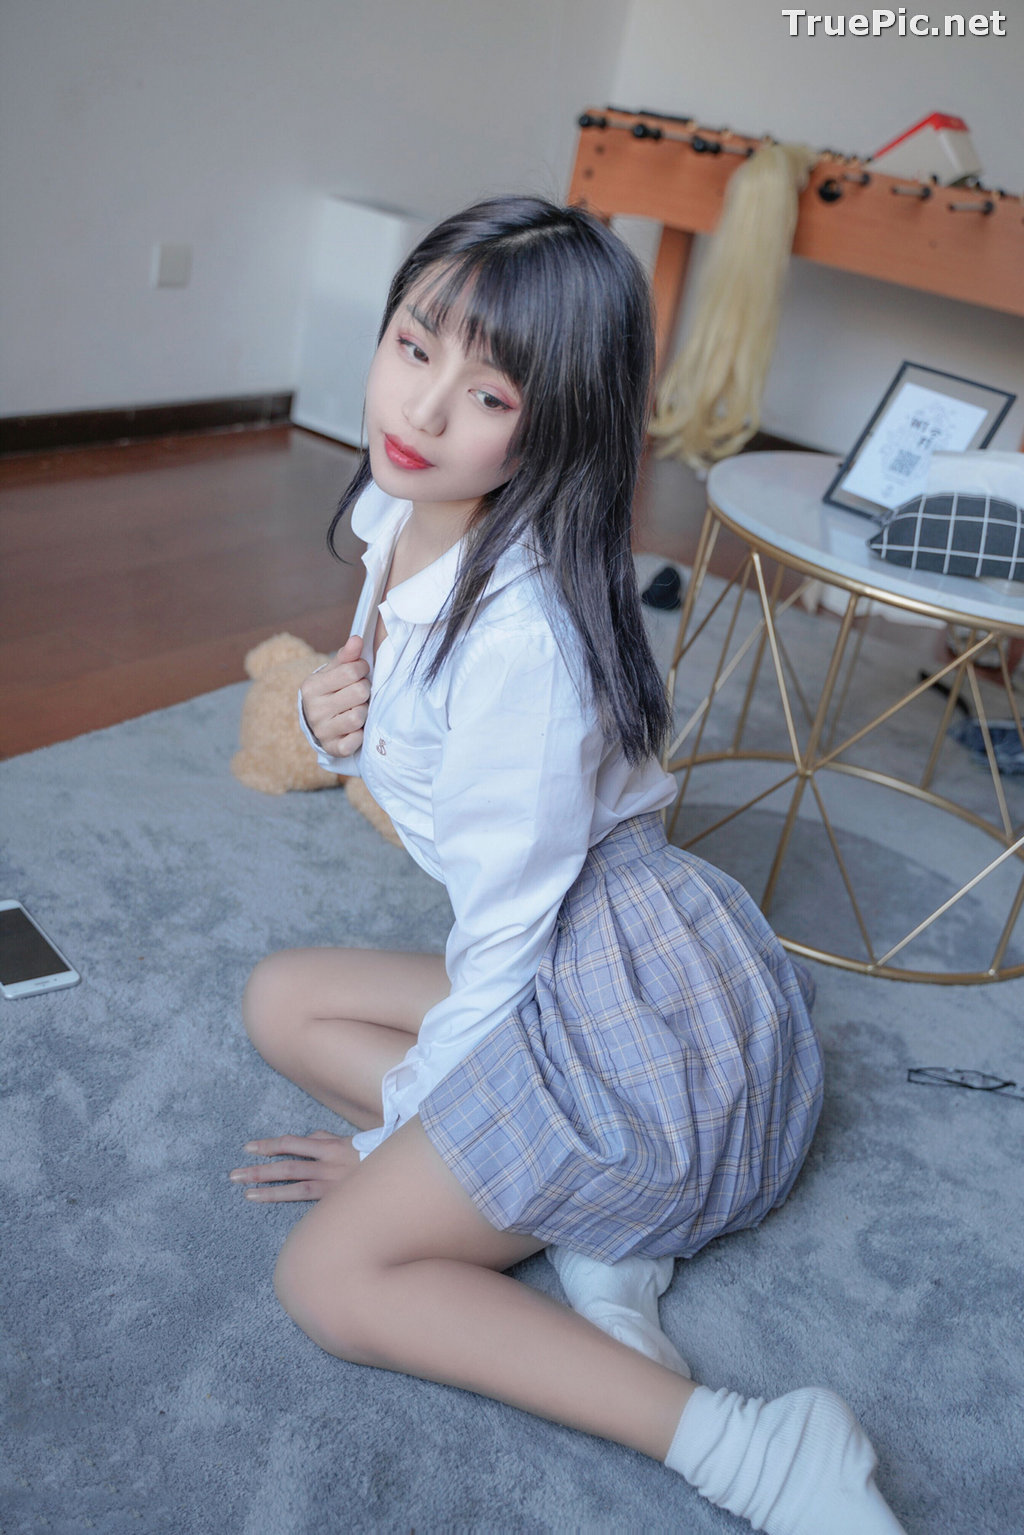 Image [MTCos] 喵糖映画 Vol.047 – Chinese Cute Model – Sexy Student Uniform - TruePic.net - Picture-39